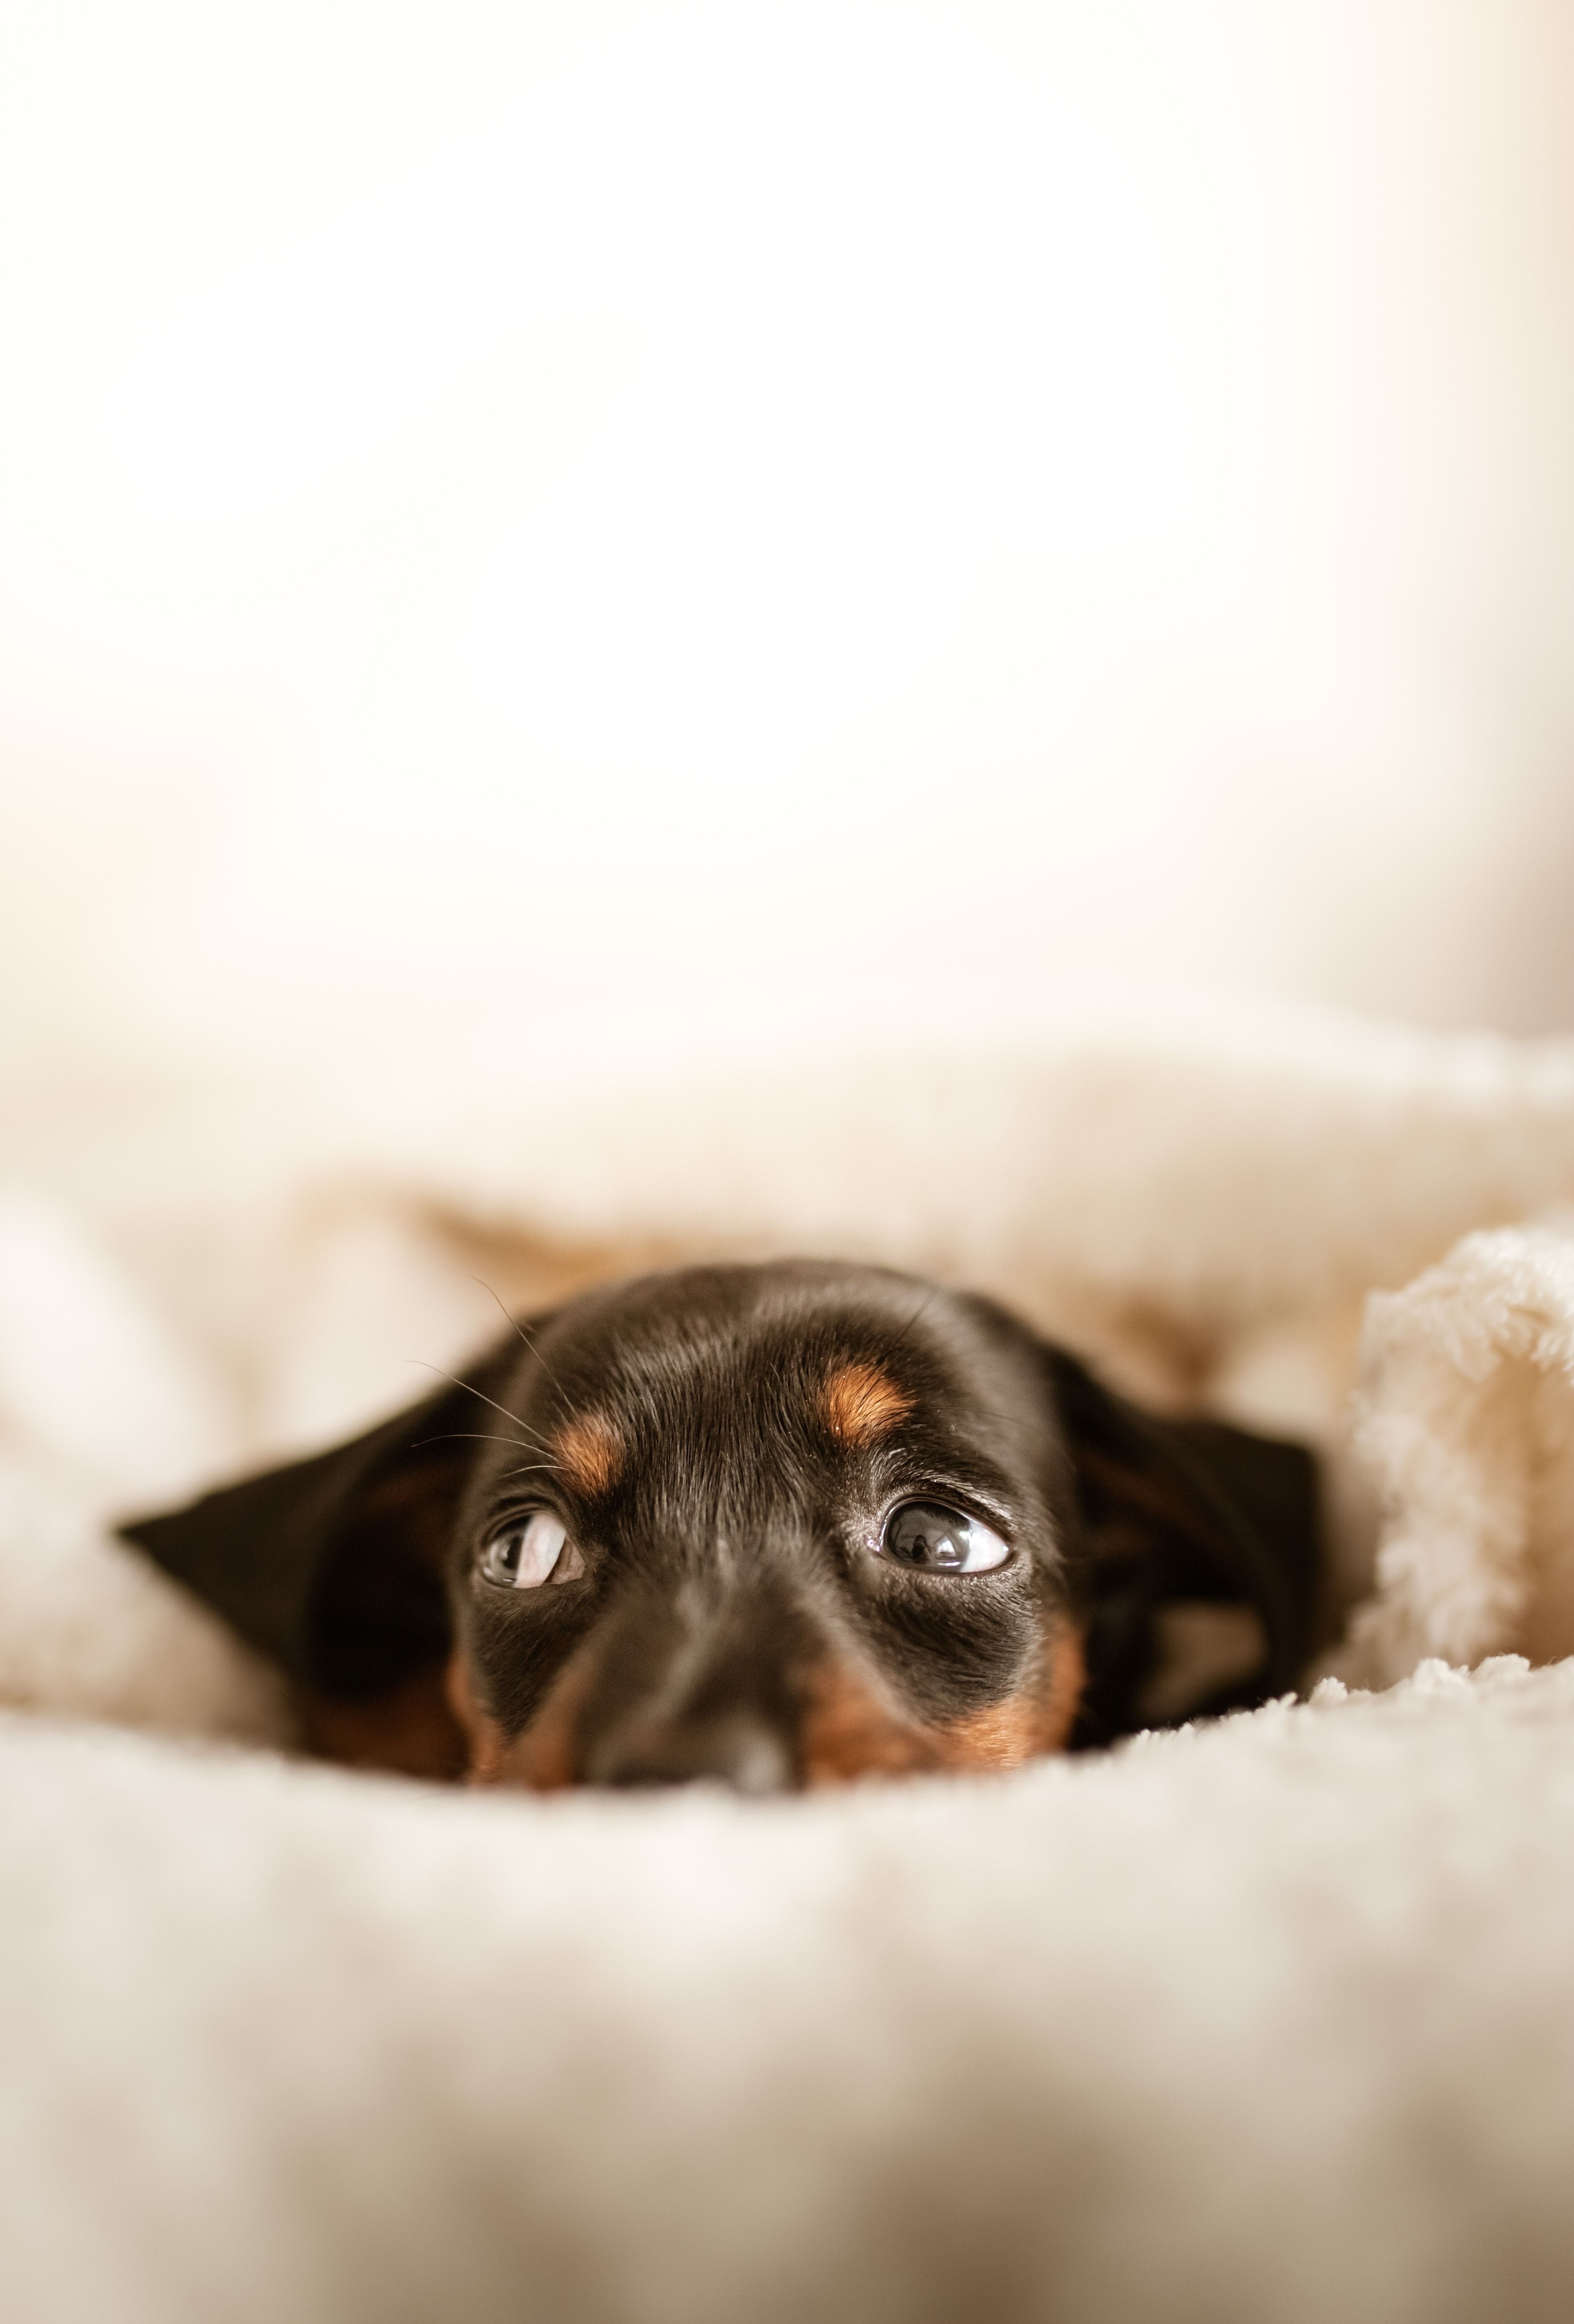 scared puppy peeking out from uunder blanket